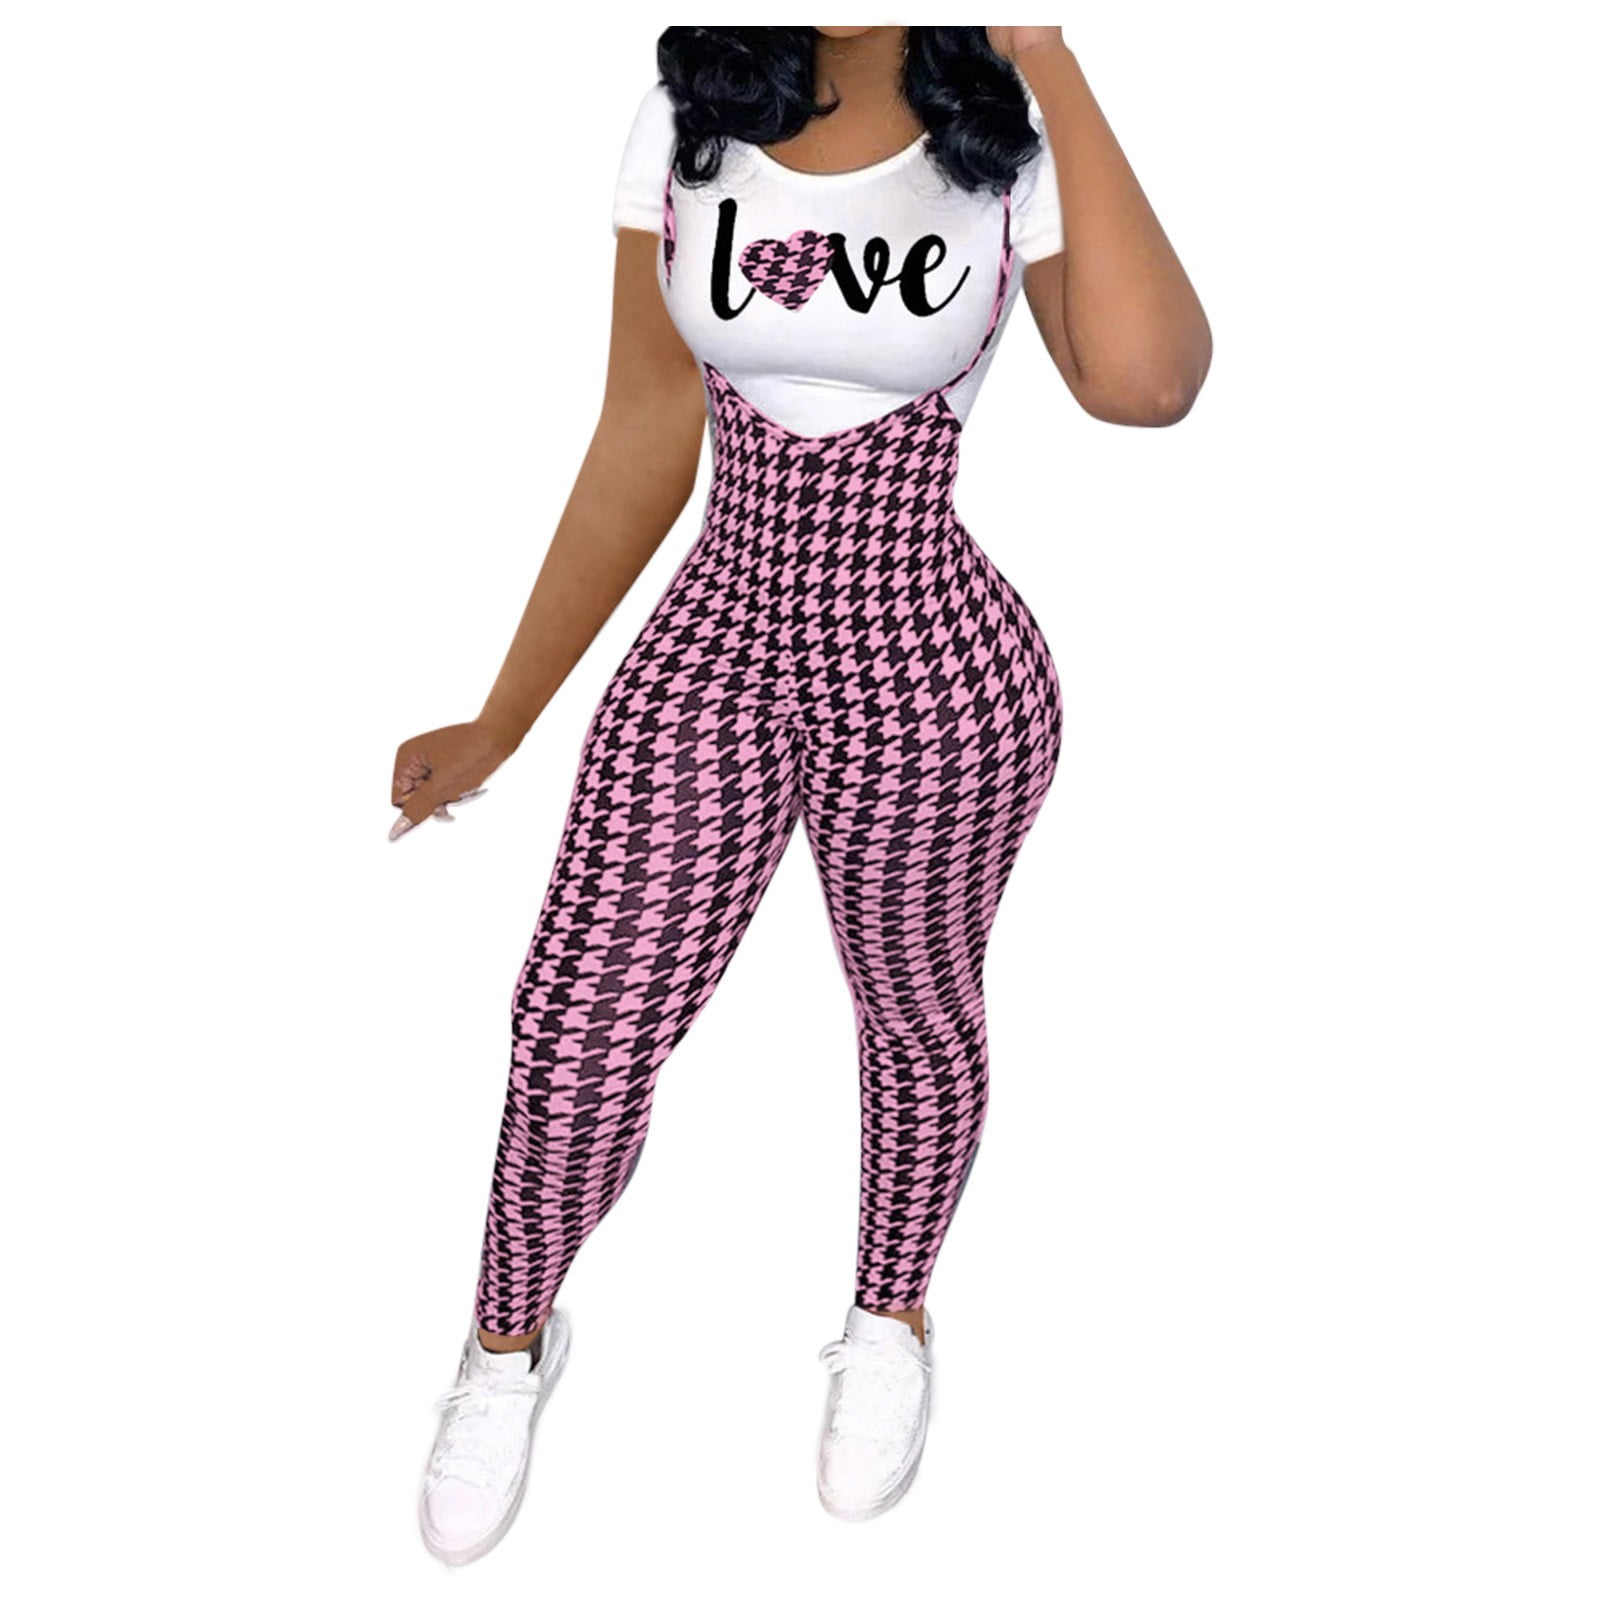 HSMQHJWE Mother Of The Bride Pant Suits Plus Size Pants And Top Set For  Women Party Women'S Two Piece Outfits Hoodies Top And Elastic Waistband  Pant